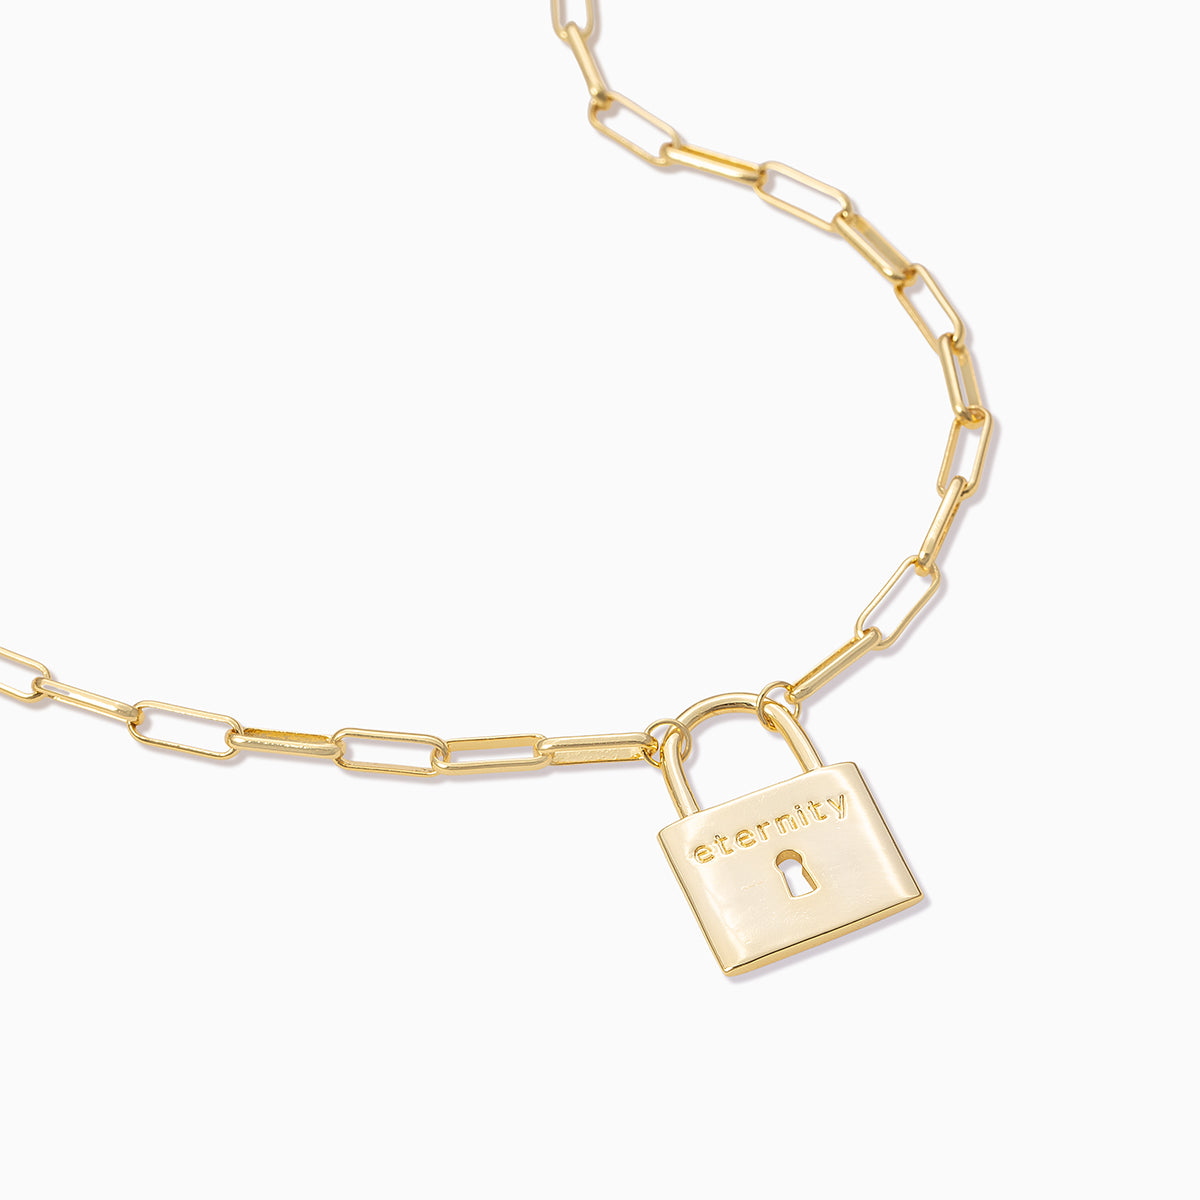 Eternity Lock Necklace | Gold | Product Detail Image | Uncommon James